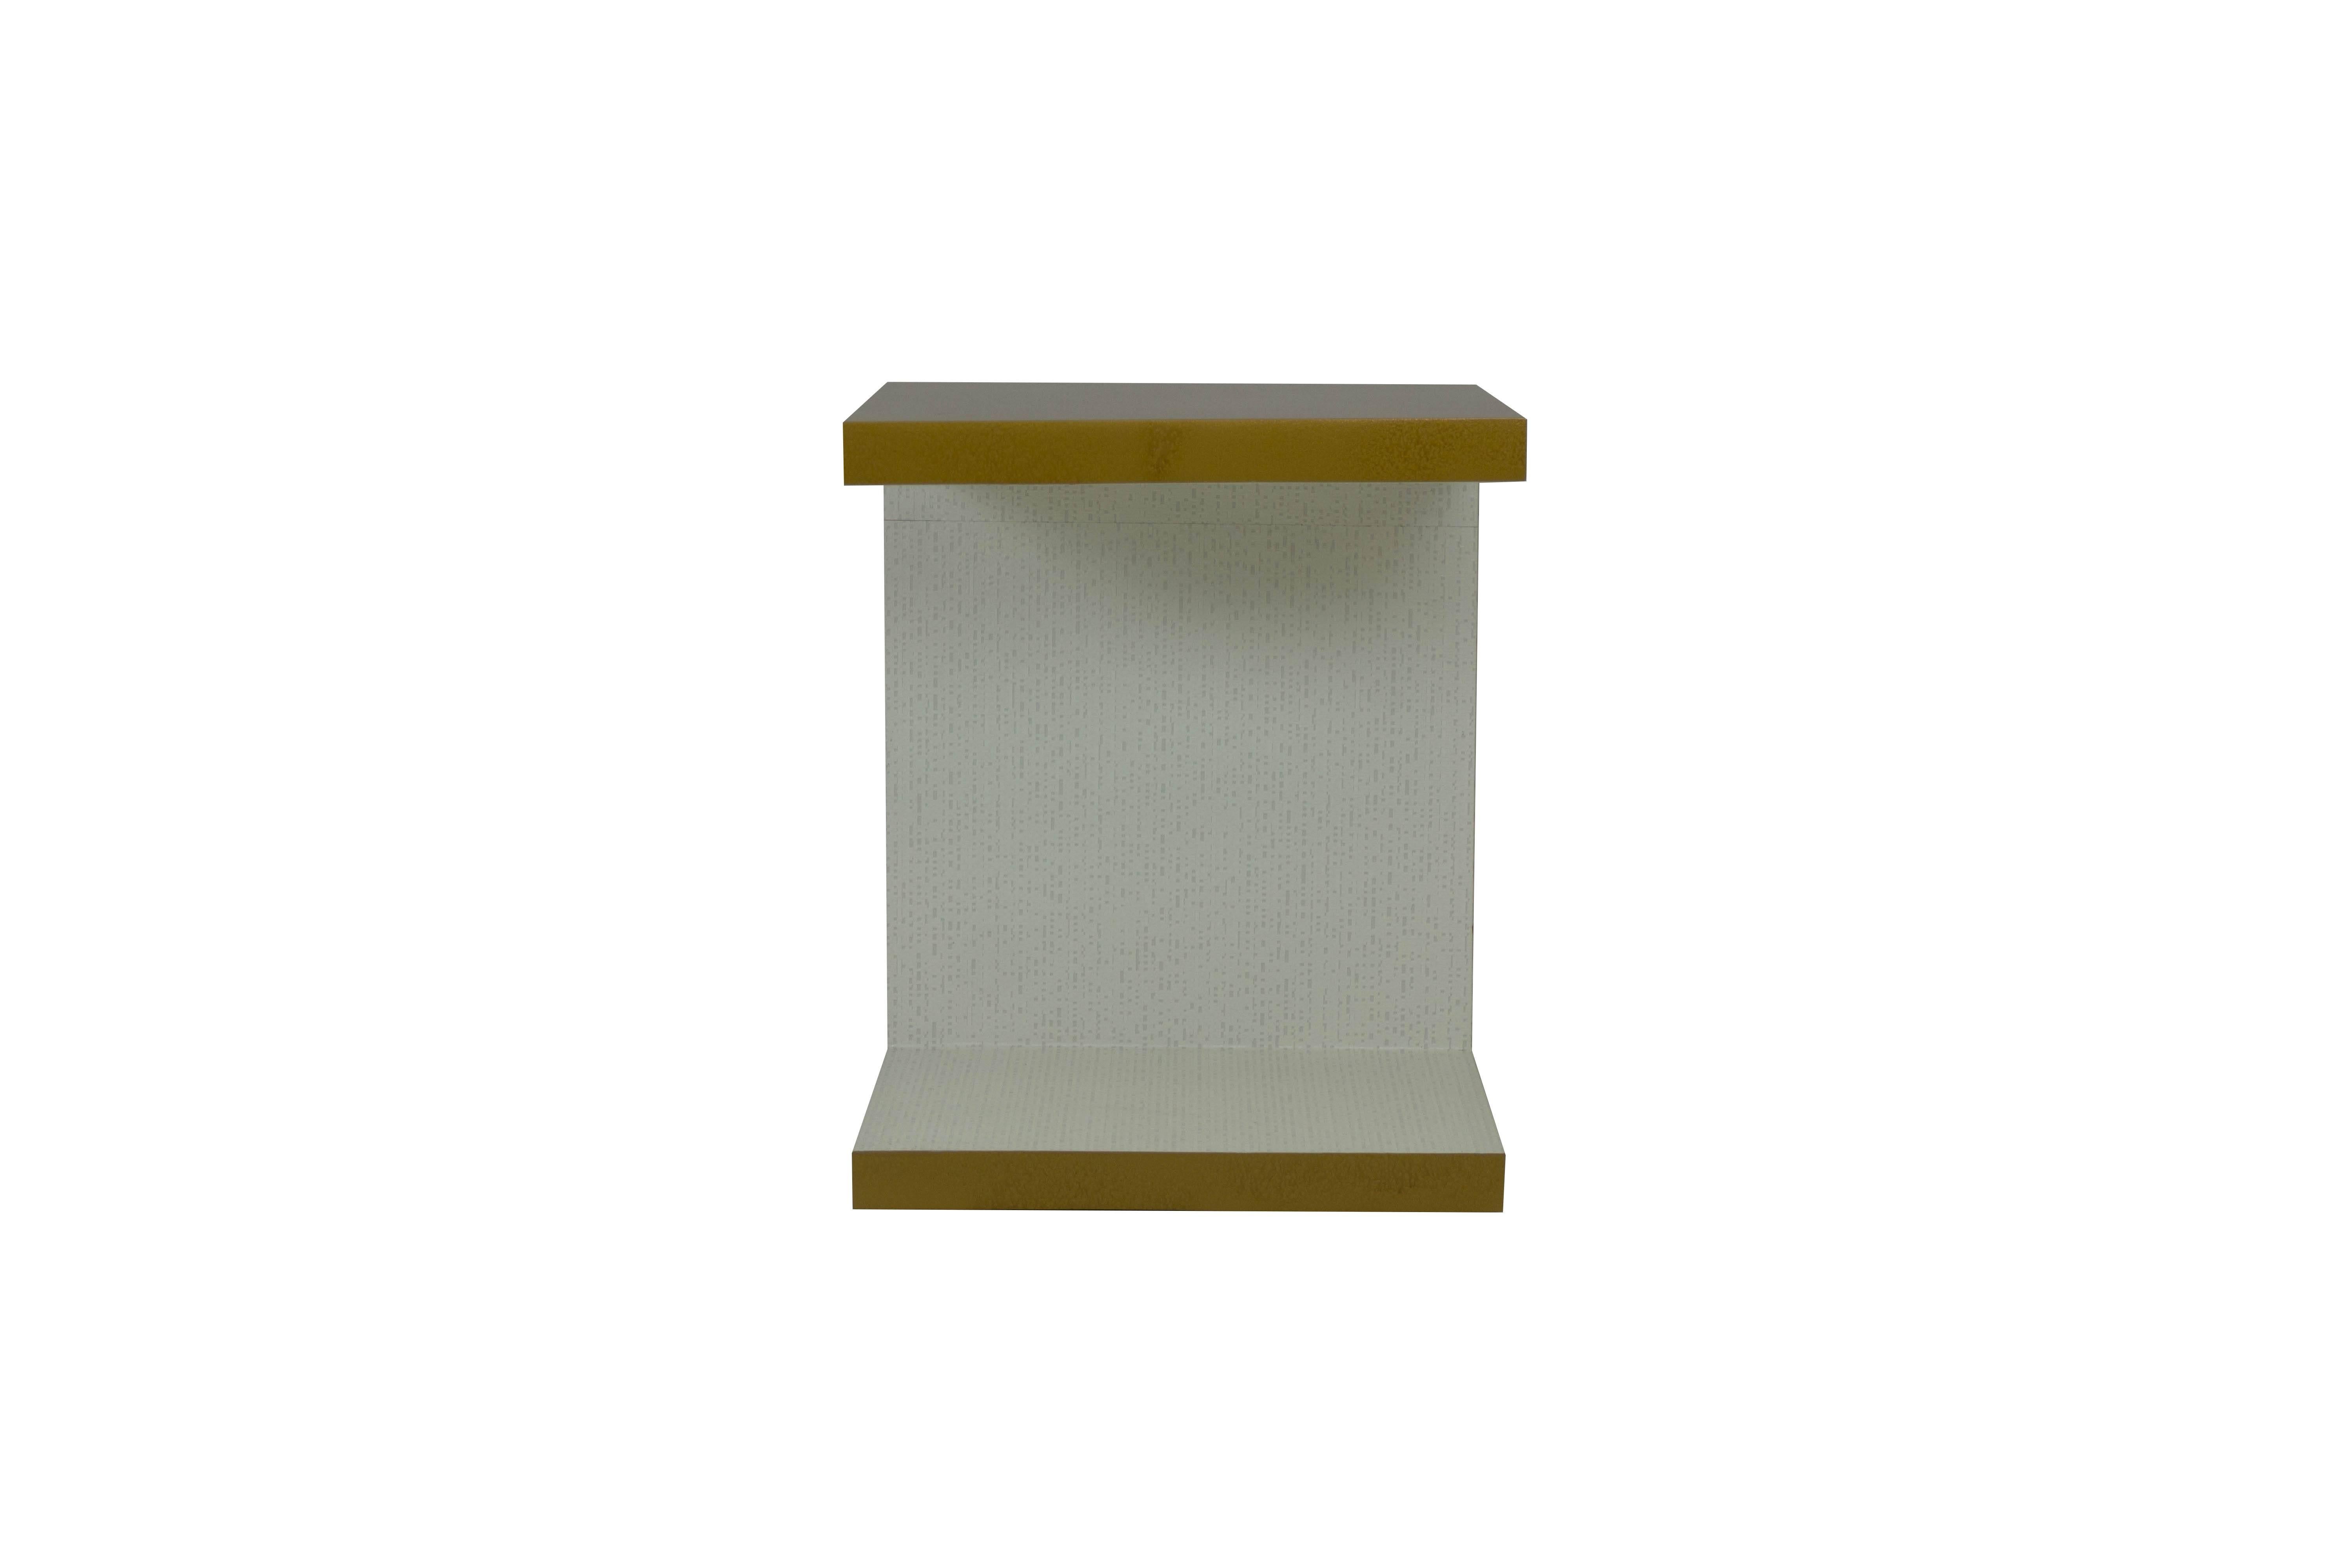 Large modern end table lacquered on outside in faux bronze, giving a glazed and slightly textured hand. Inside is finished with white embossed vinyl wallcovering. Great for stacking books on base, thus keeping the top uncluttered.

Overall: 18”W x